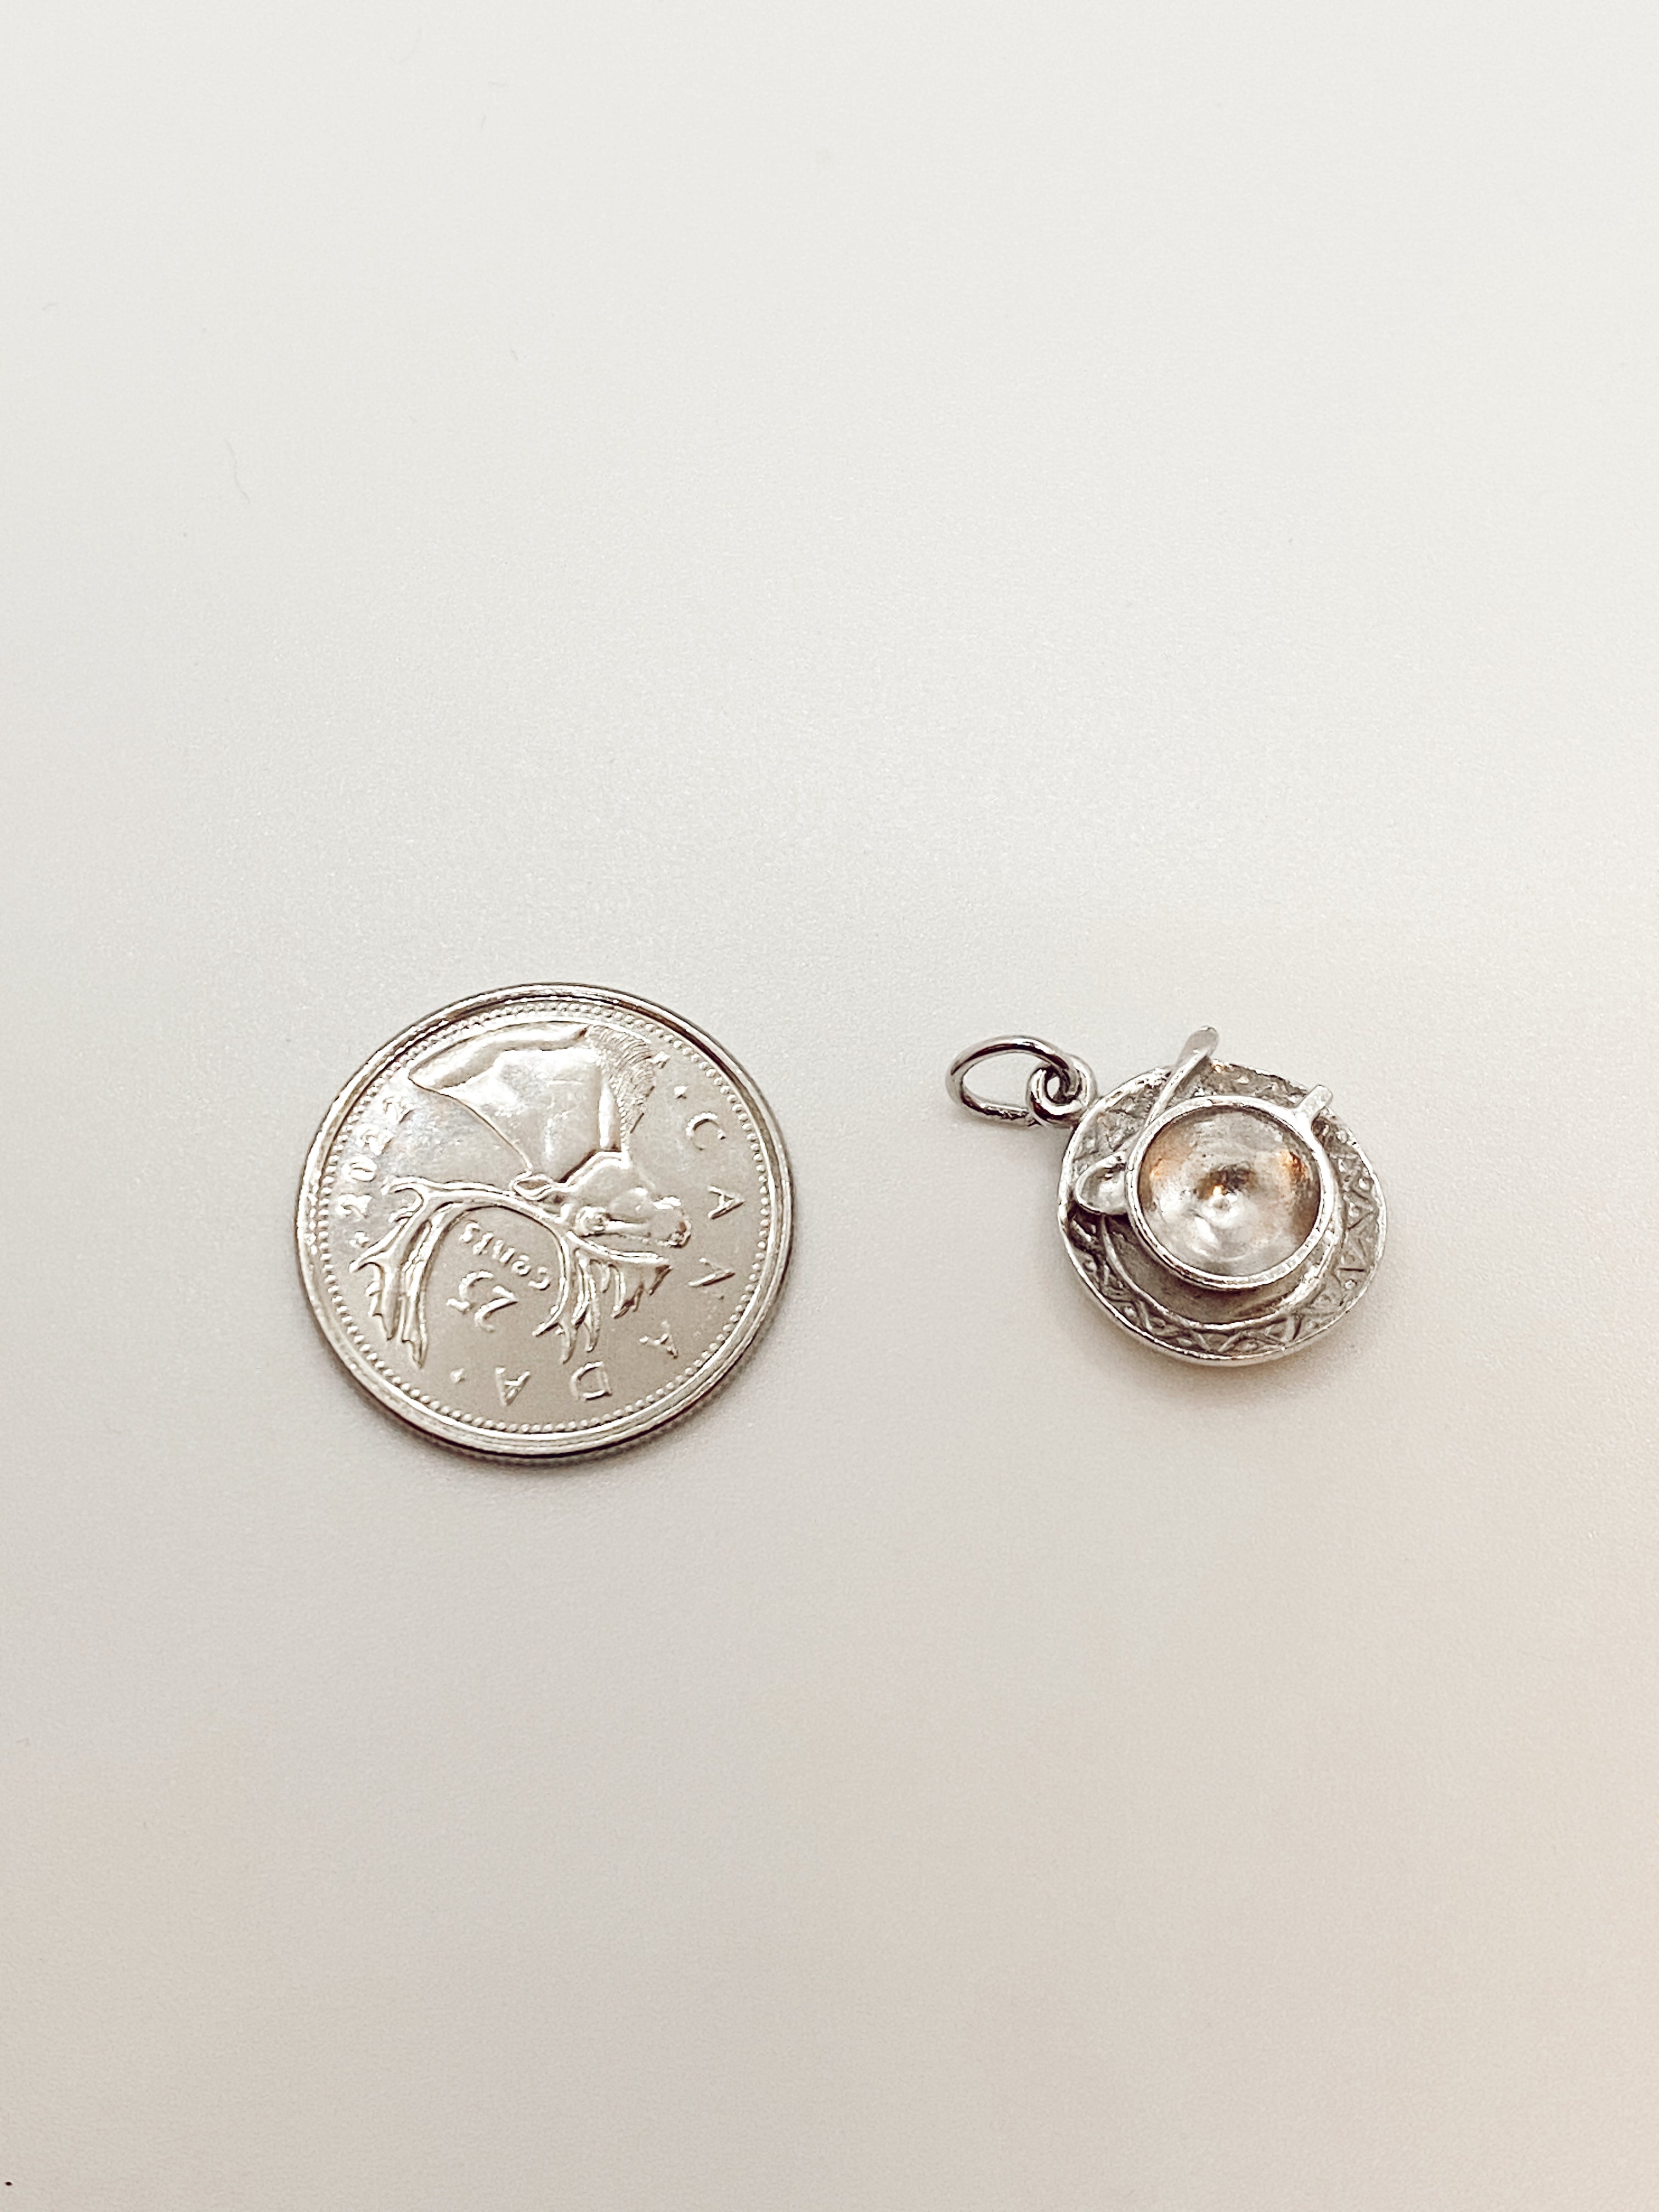 Teacup, Saucer and Silver Spoon Charm